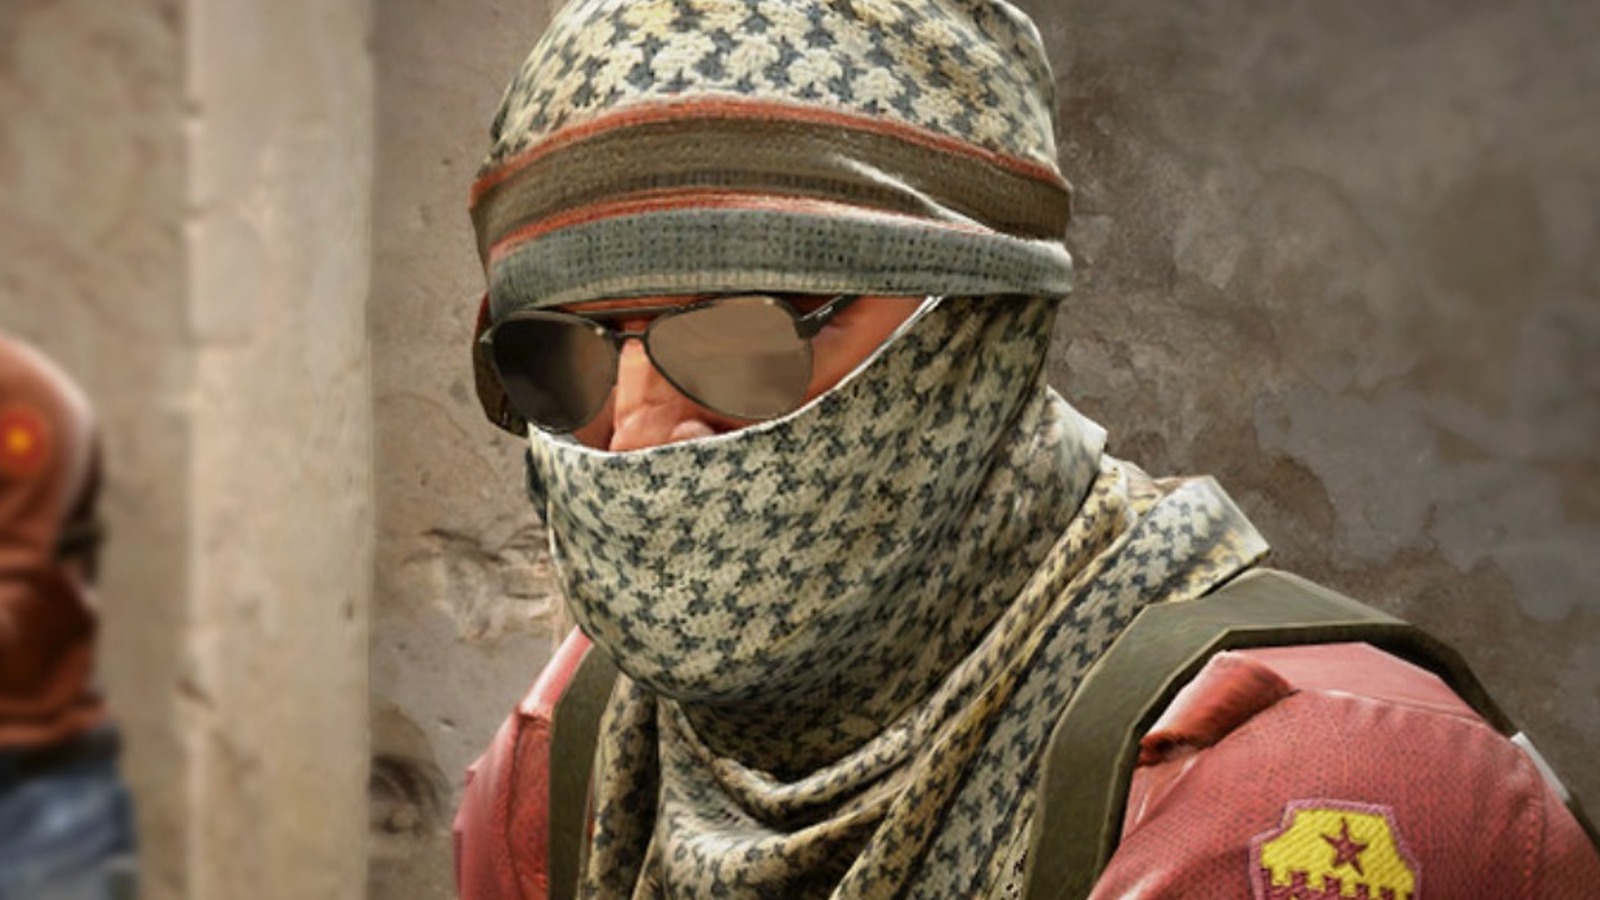 Counter Strike 2 will finally be released this month! 